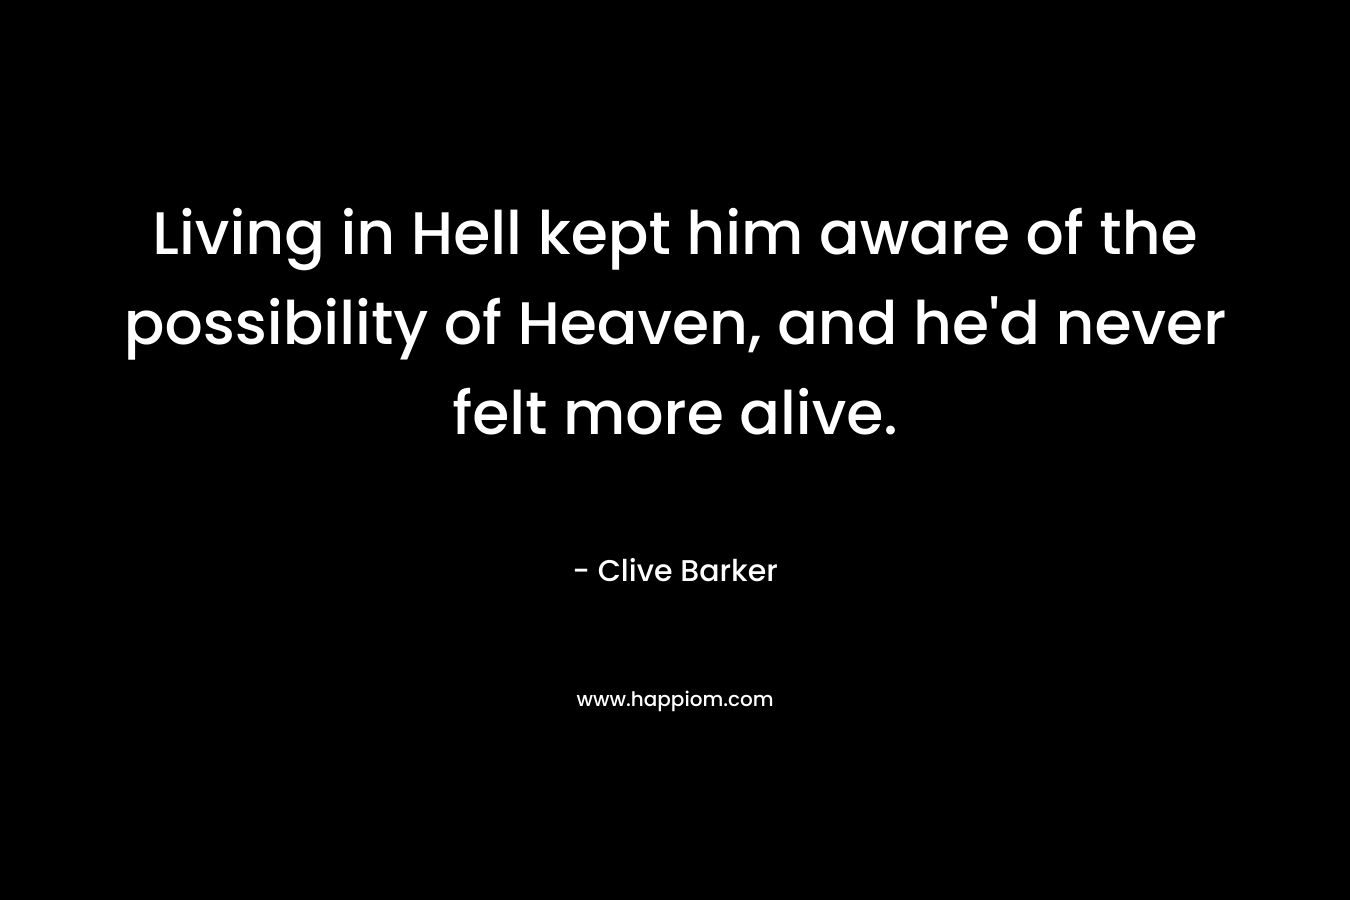 Living in Hell kept him aware of the possibility of Heaven, and he'd never felt more alive.